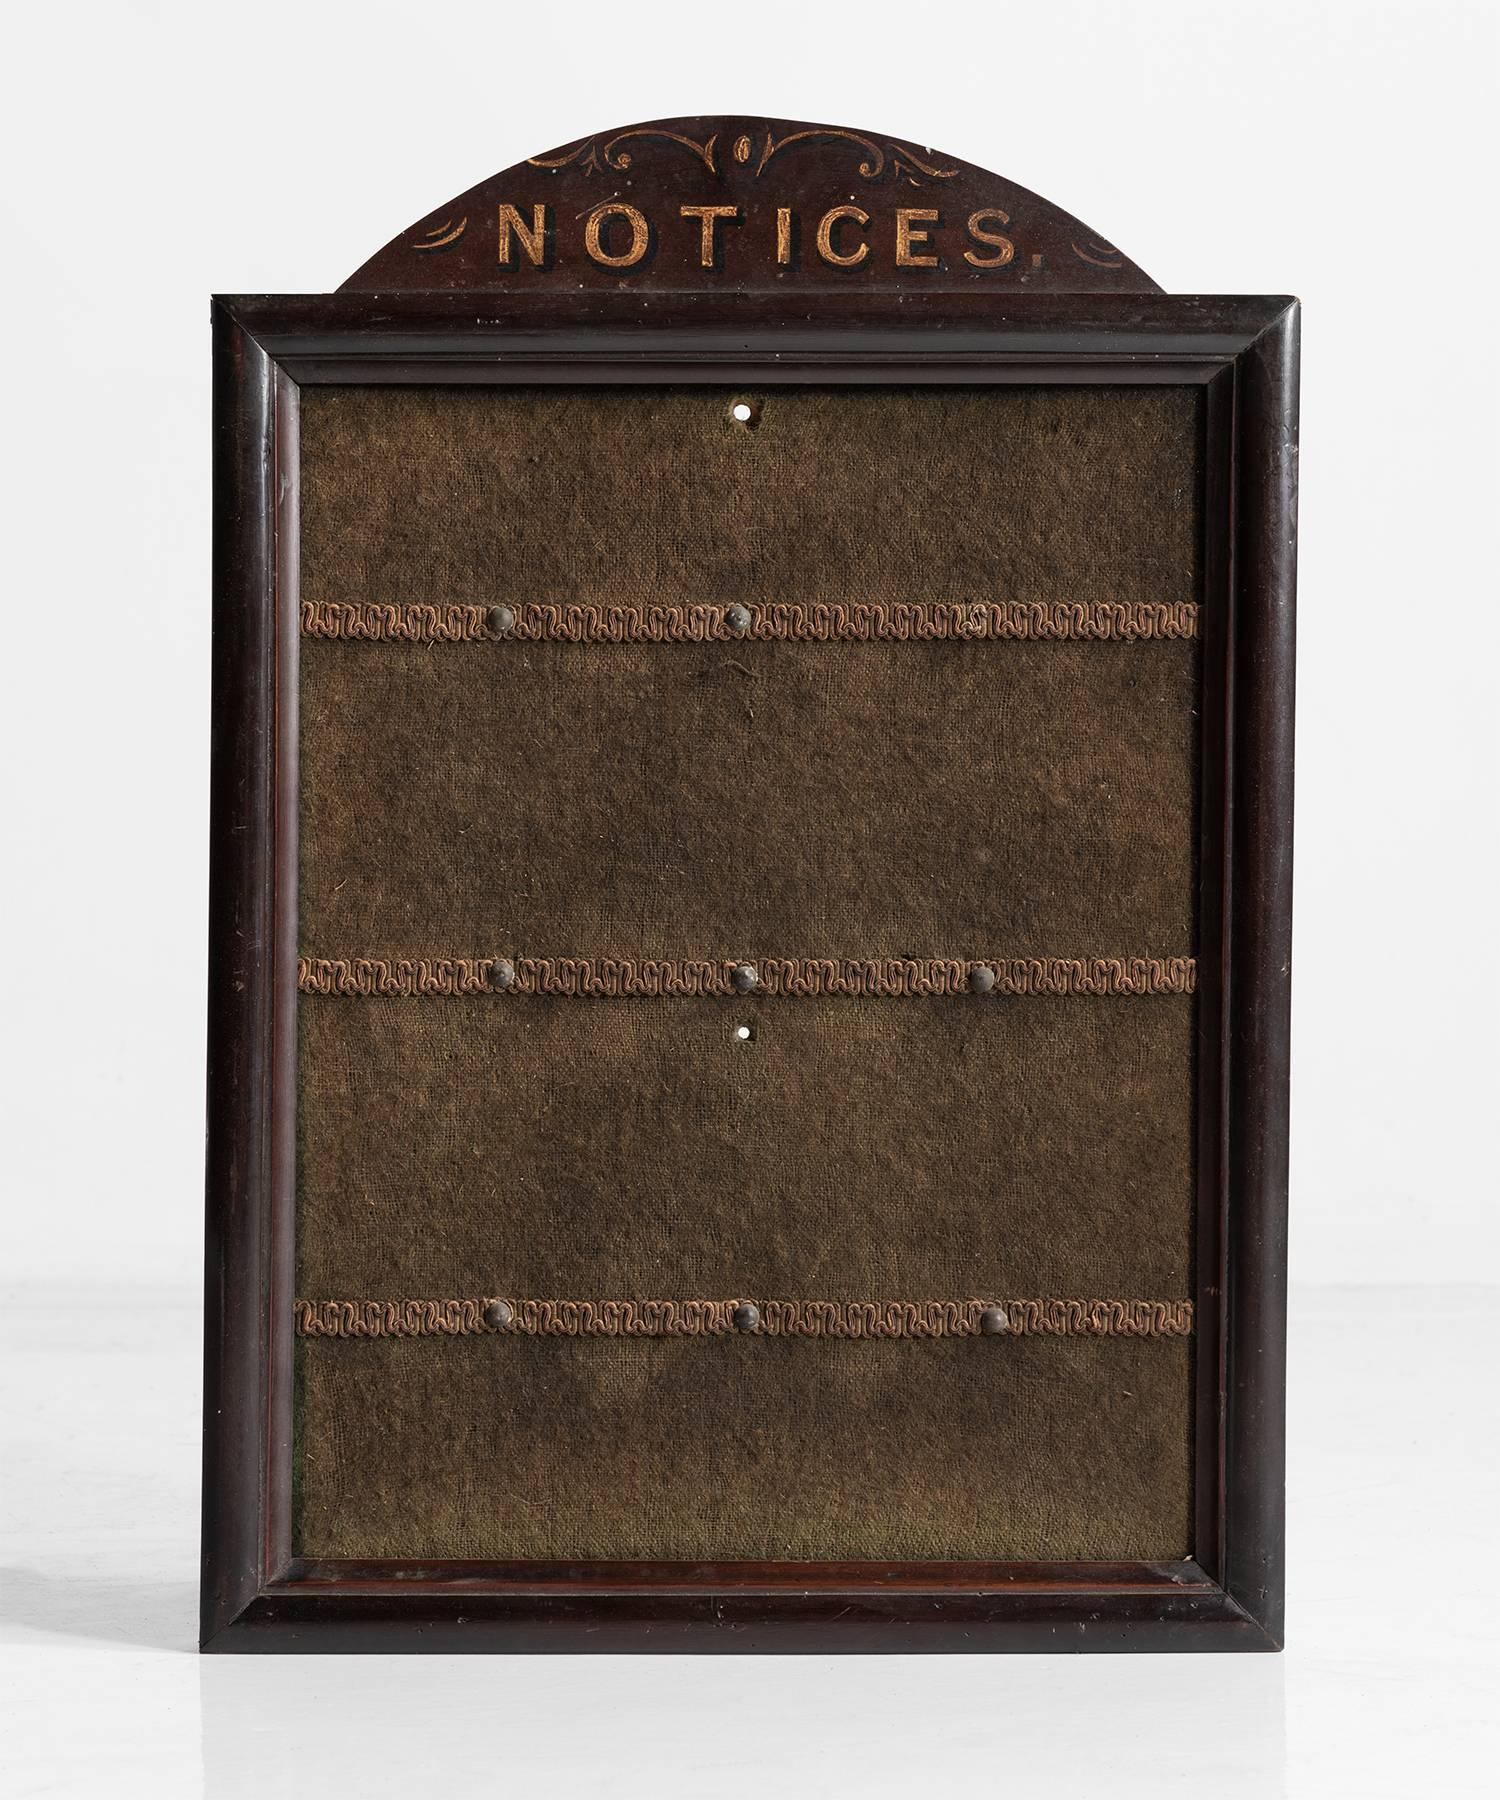 Notice board, circa 1900

Quaint board for notes features handsome wooden frame, hand-painted signage and lacing detail on green fabric.